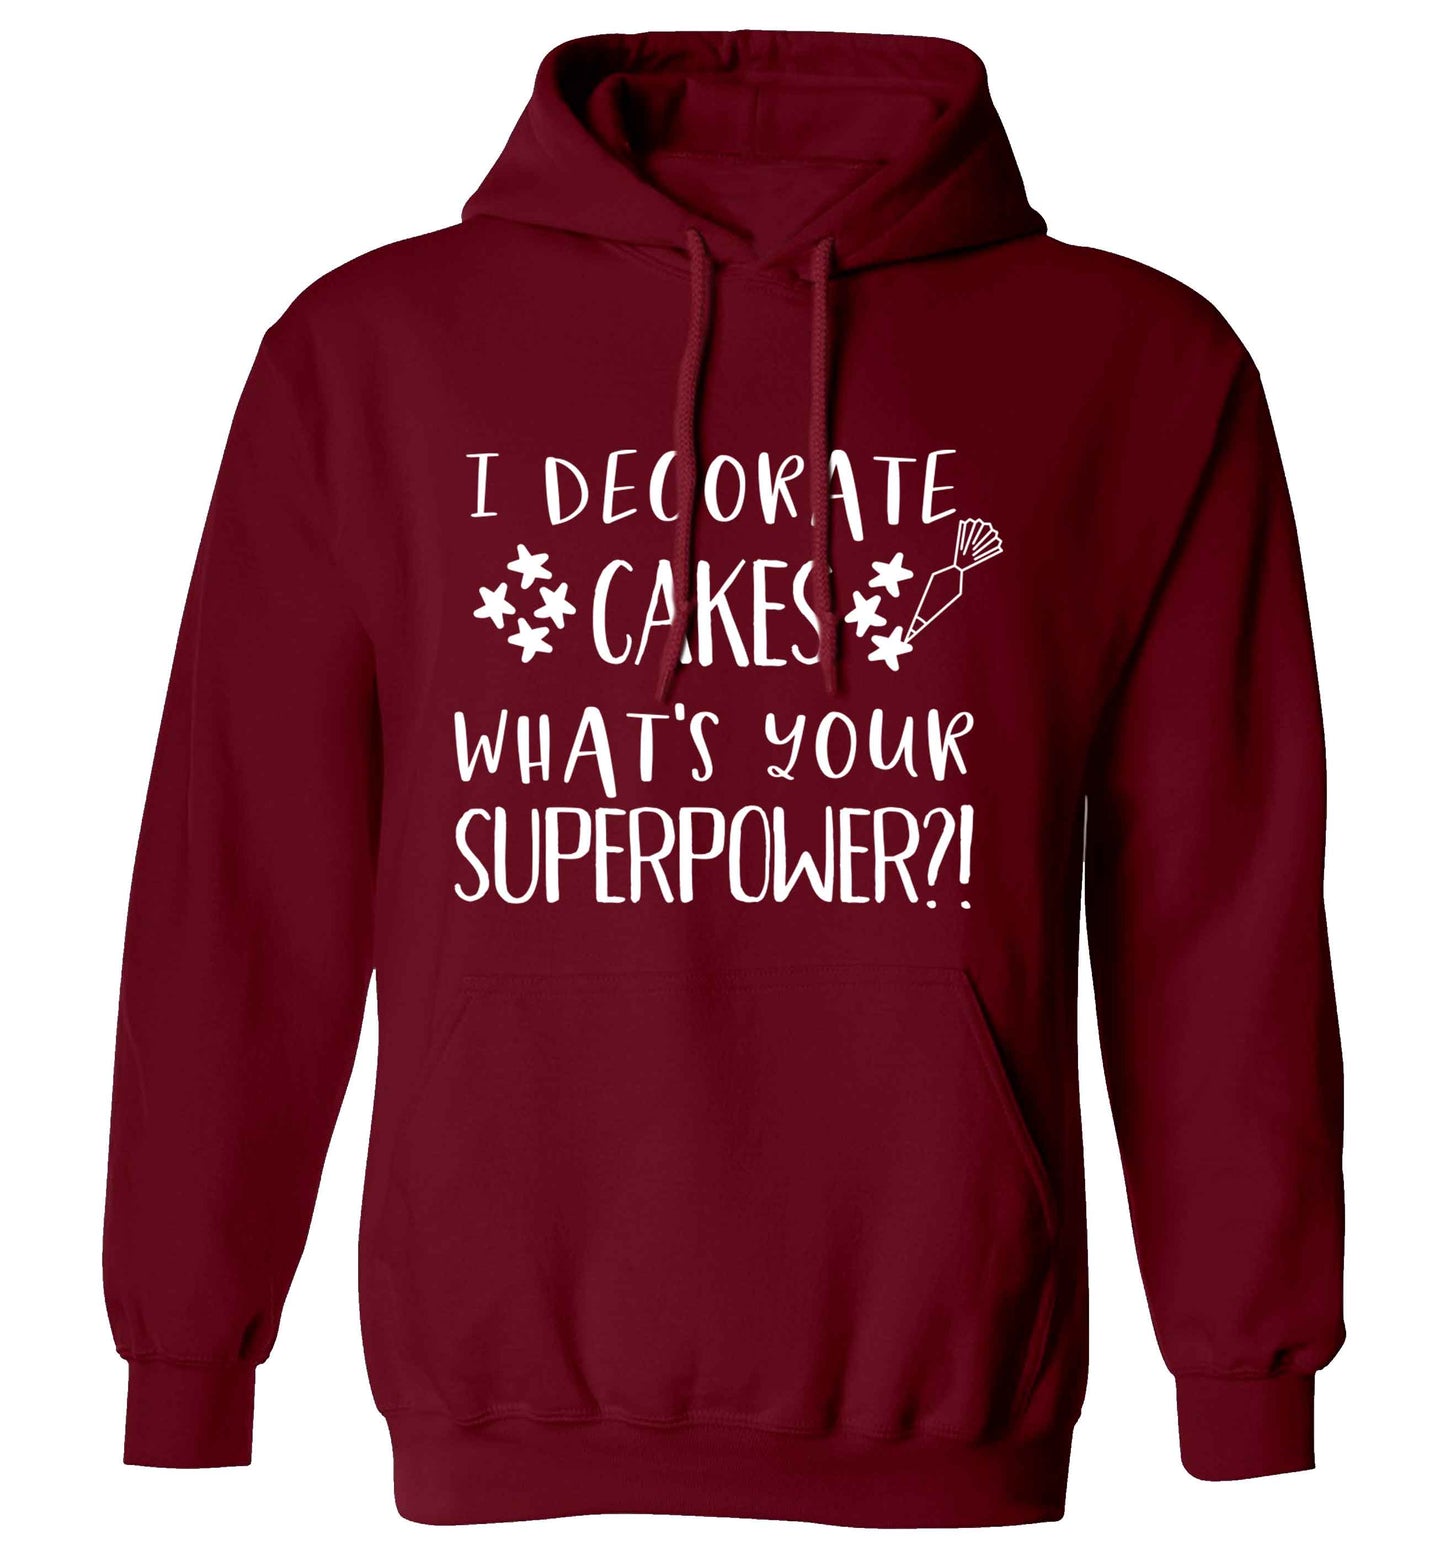 I decorate cakes what's your superpower?! adults unisex maroon hoodie 2XL